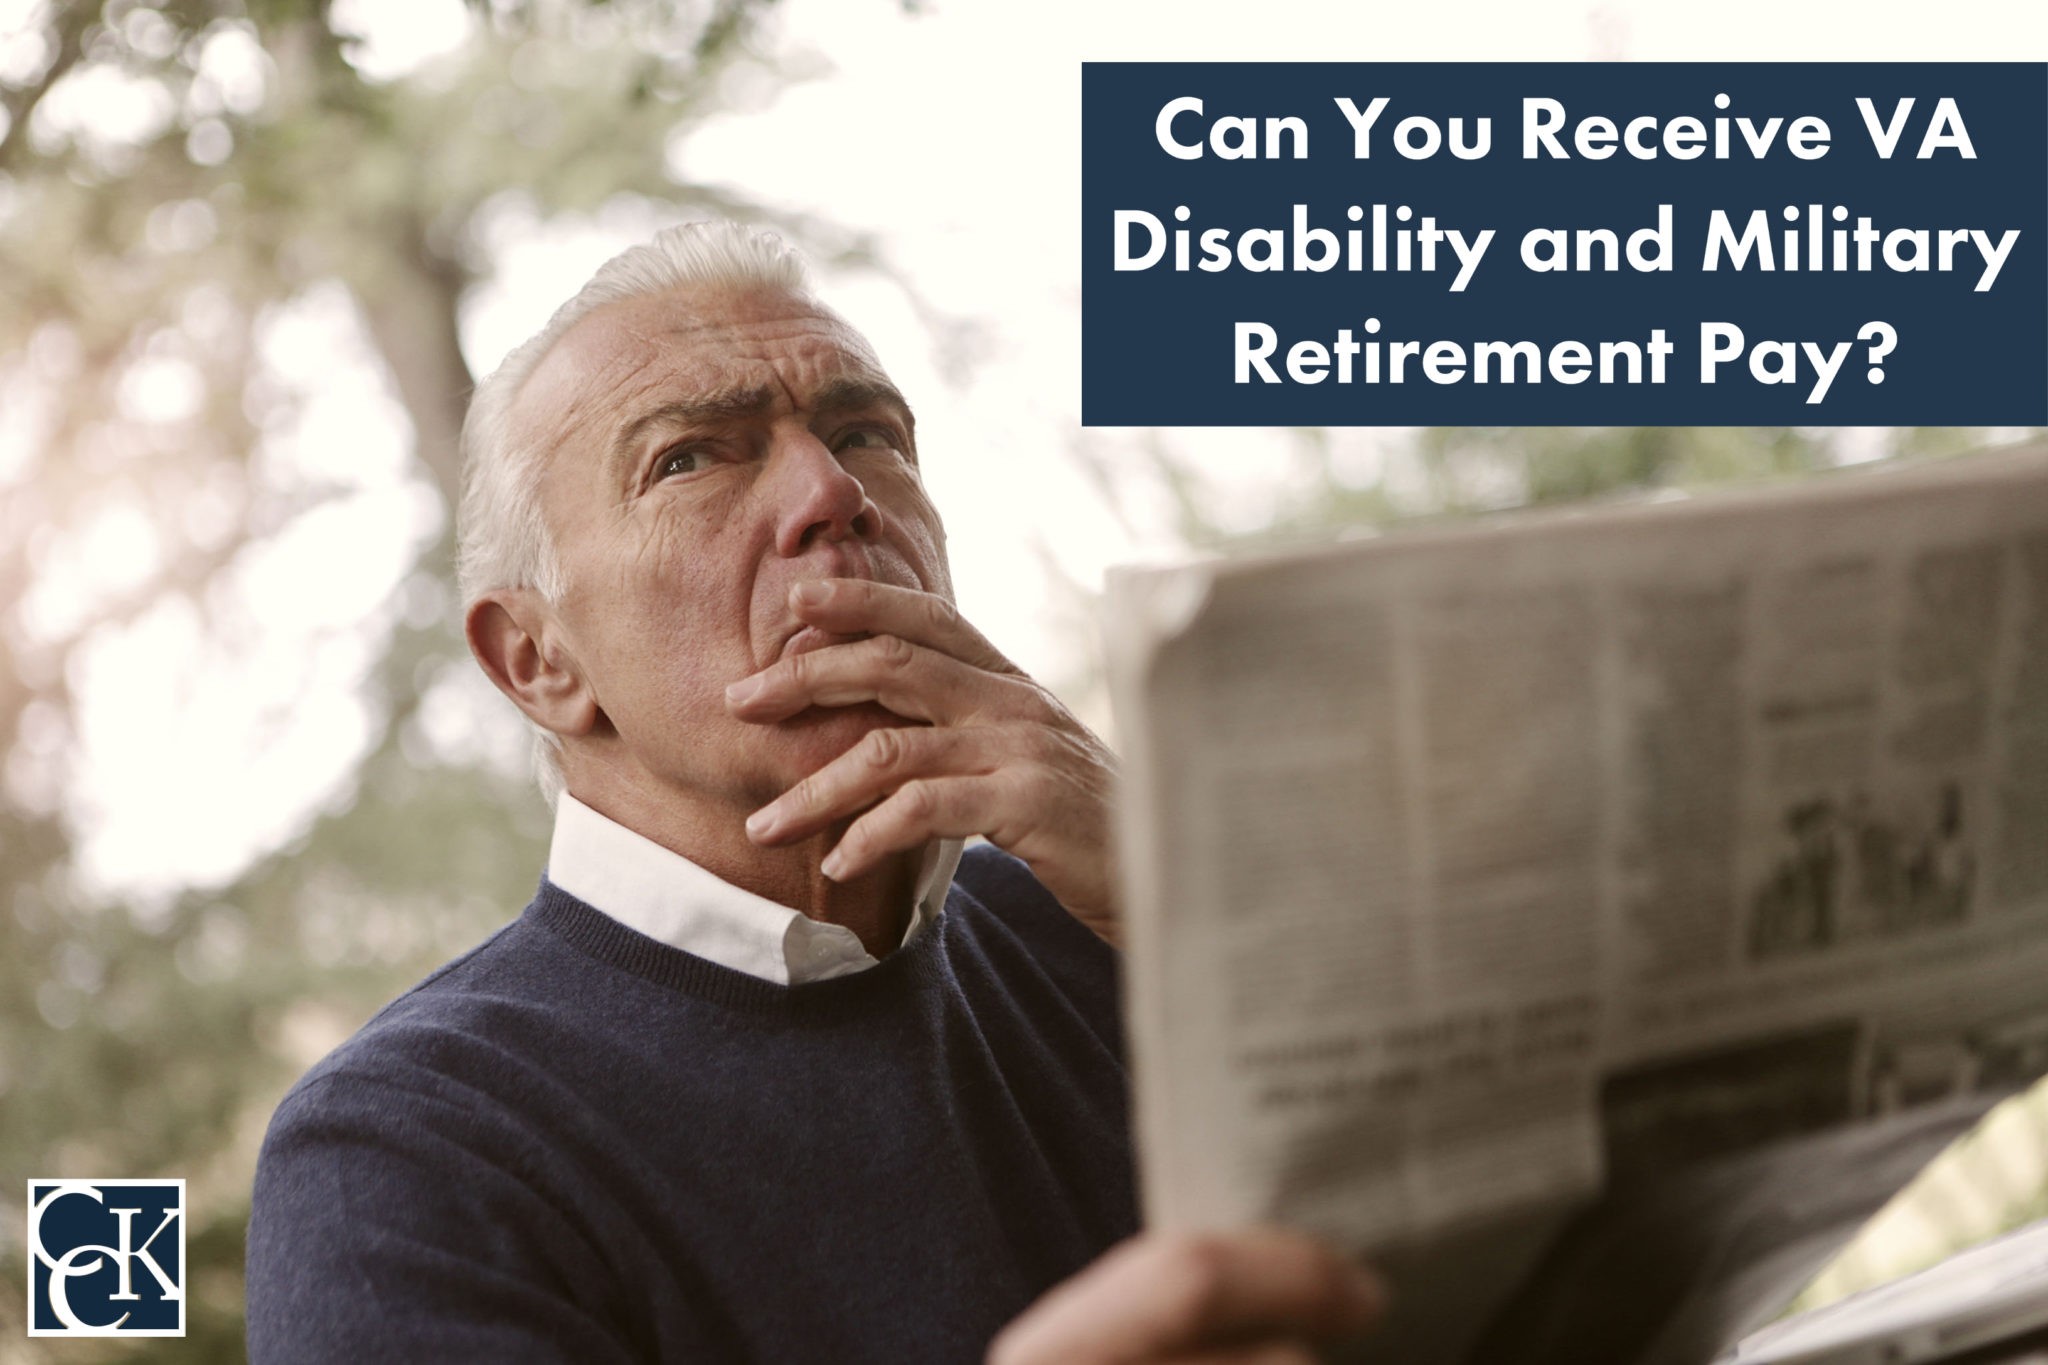 can-you-receive-va-disability-and-military-retirement-pay-cck-law